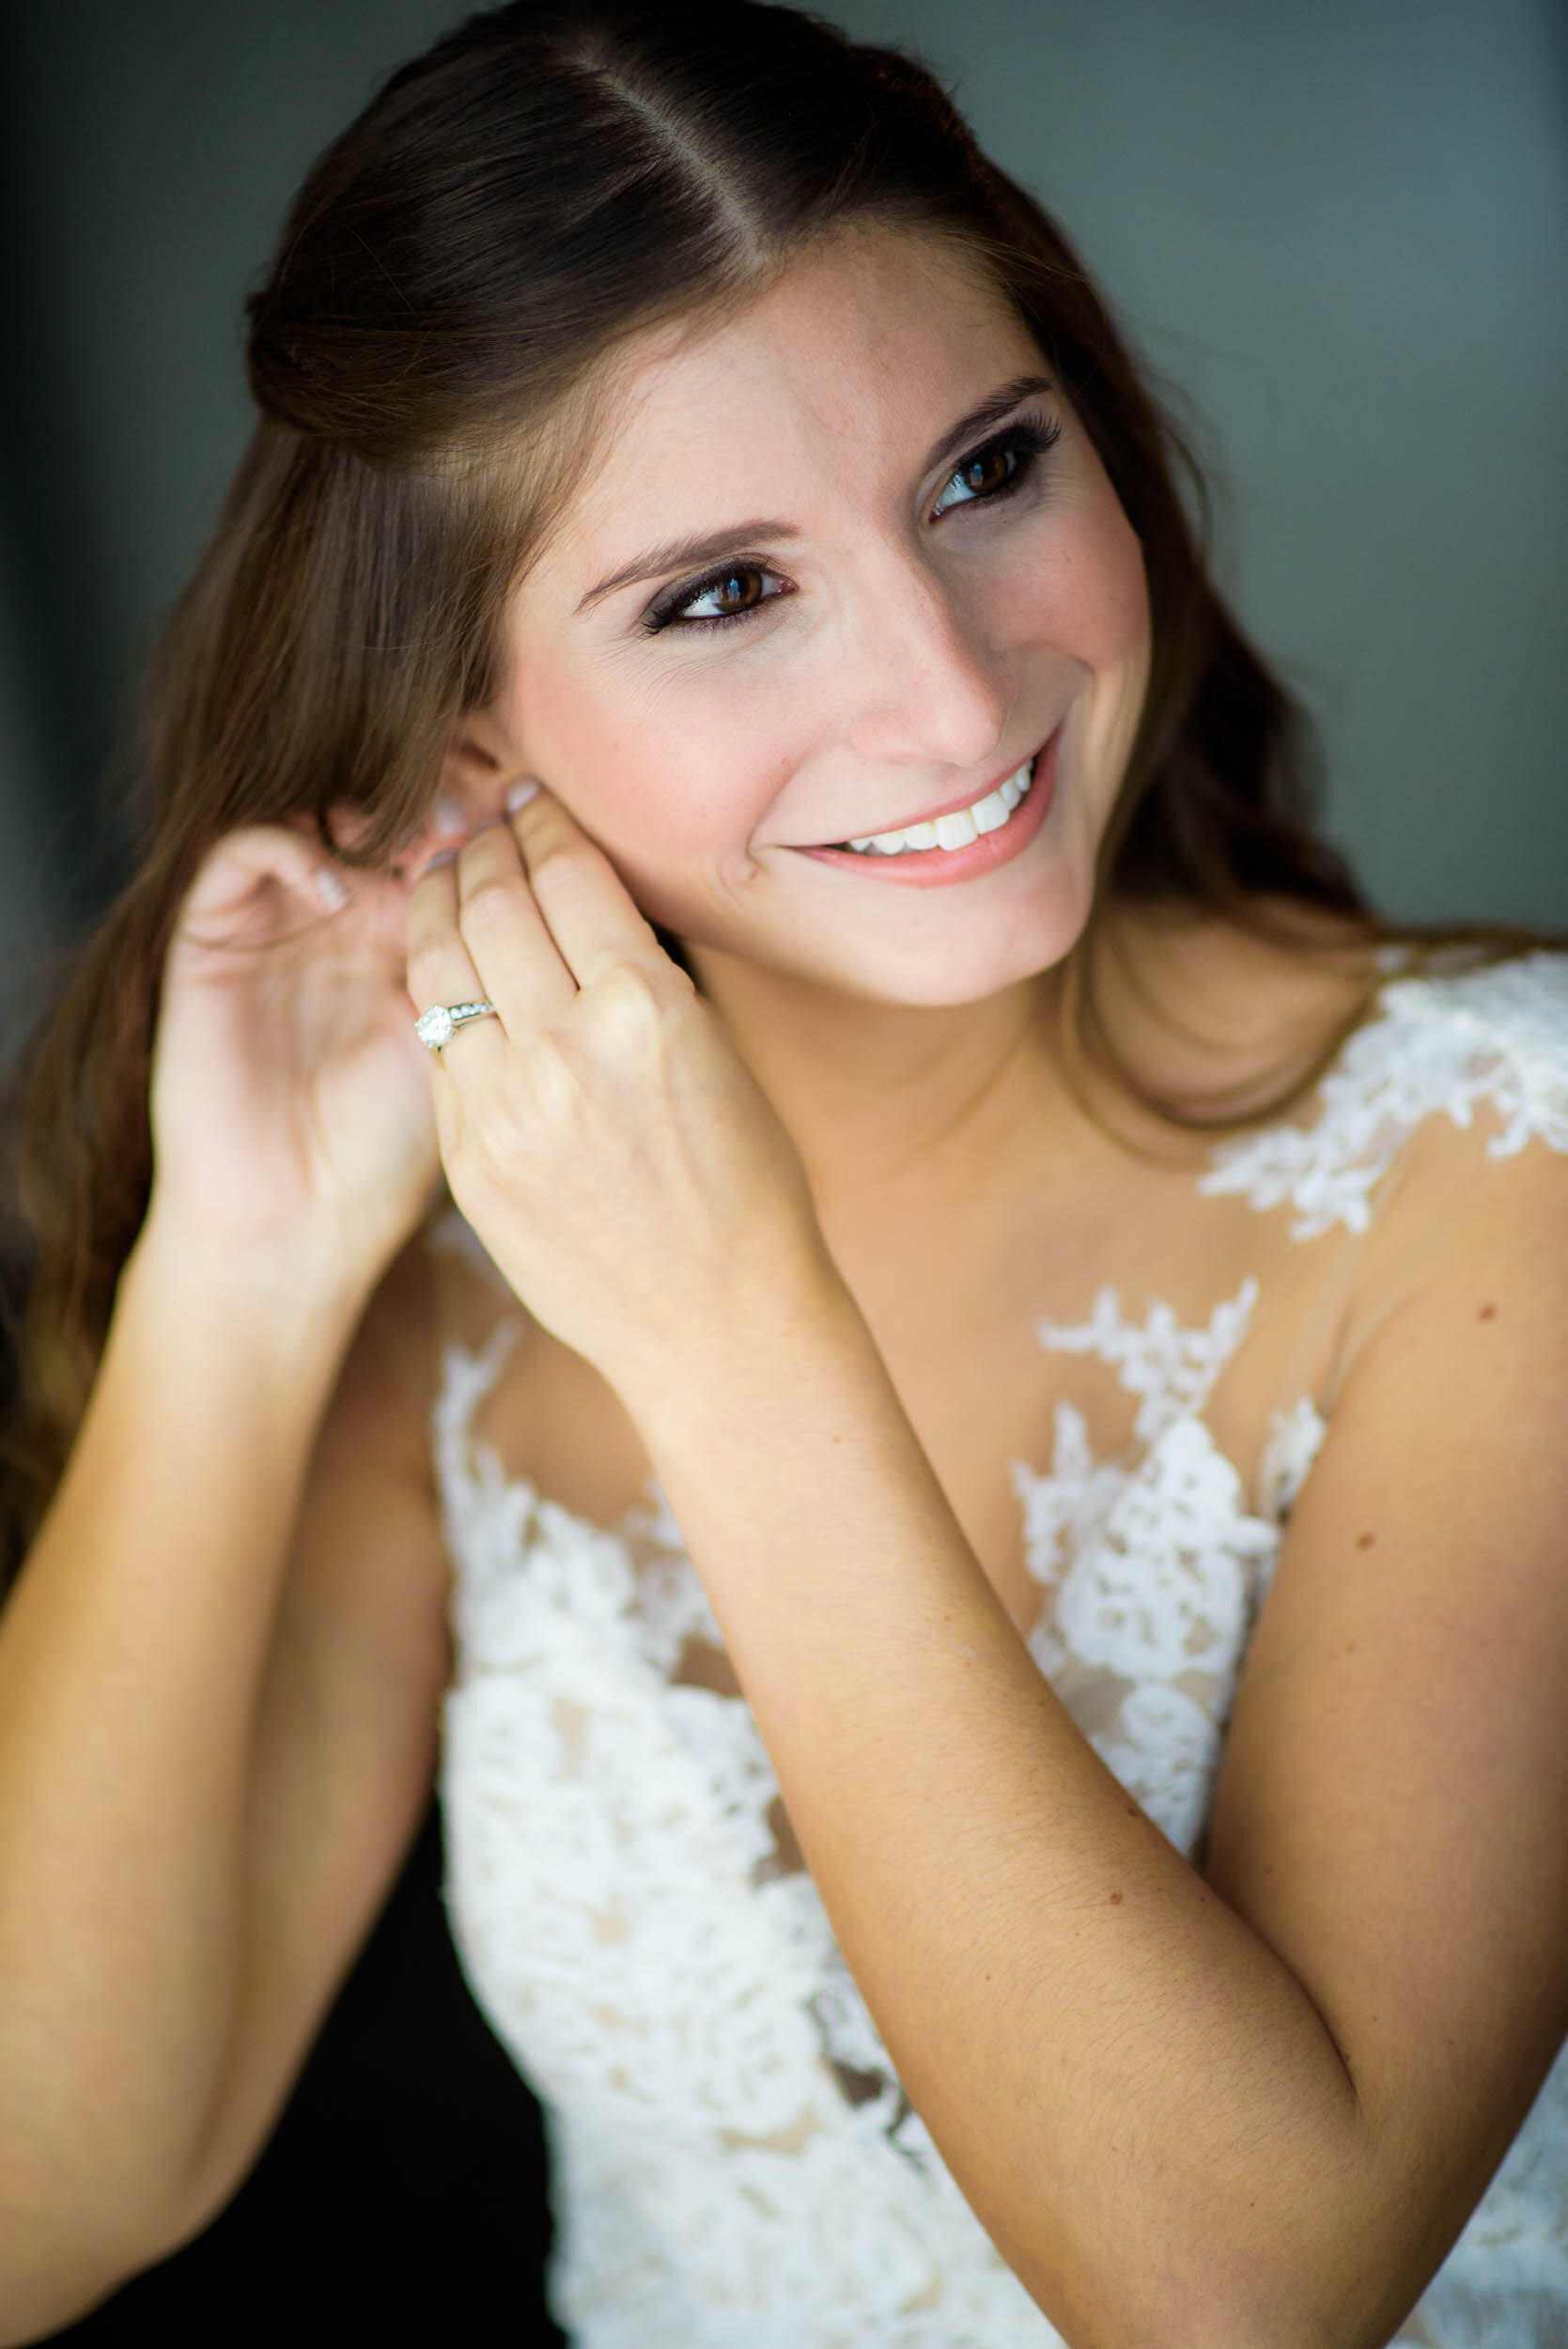 Bride getting ready on her wedding day: Ravenswood Event Center Chicago wedding captured by J. Brown Photography.  